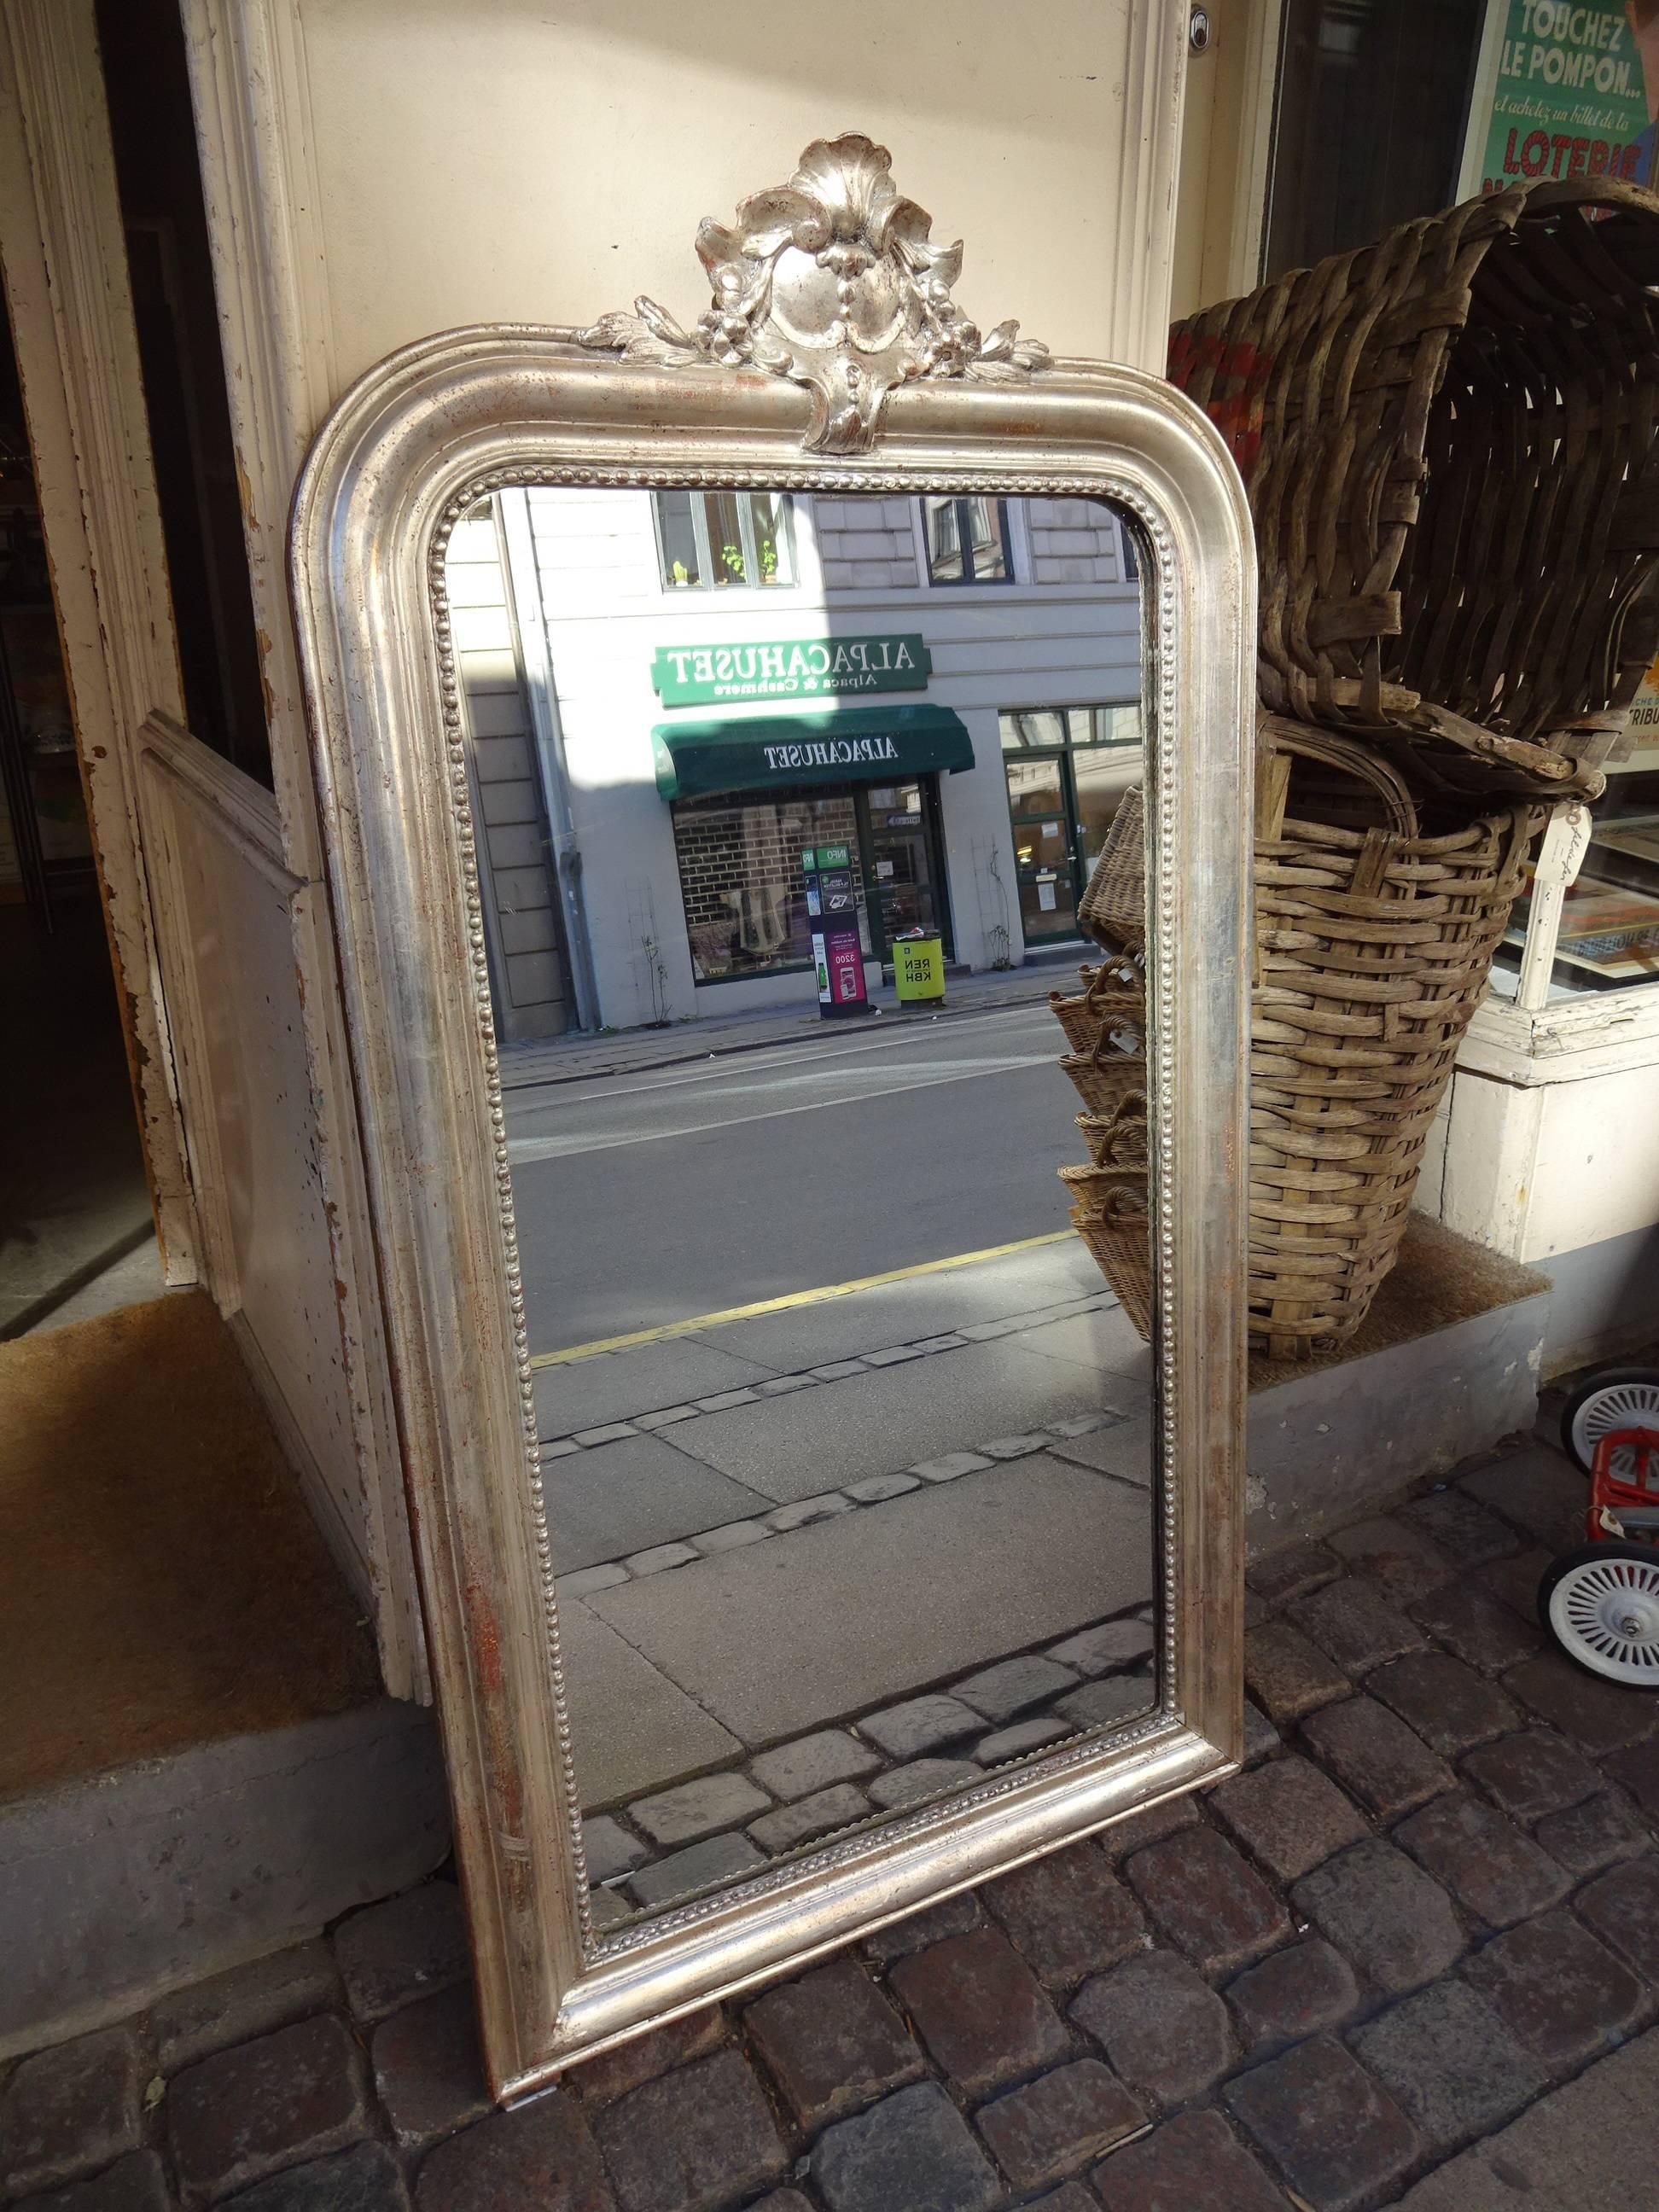 Antique Louis Philippe silver mirror from France. Original lovely silverleaf and patterning, as well as mirror glass. Wonderful ornate detail at the top of the frame.